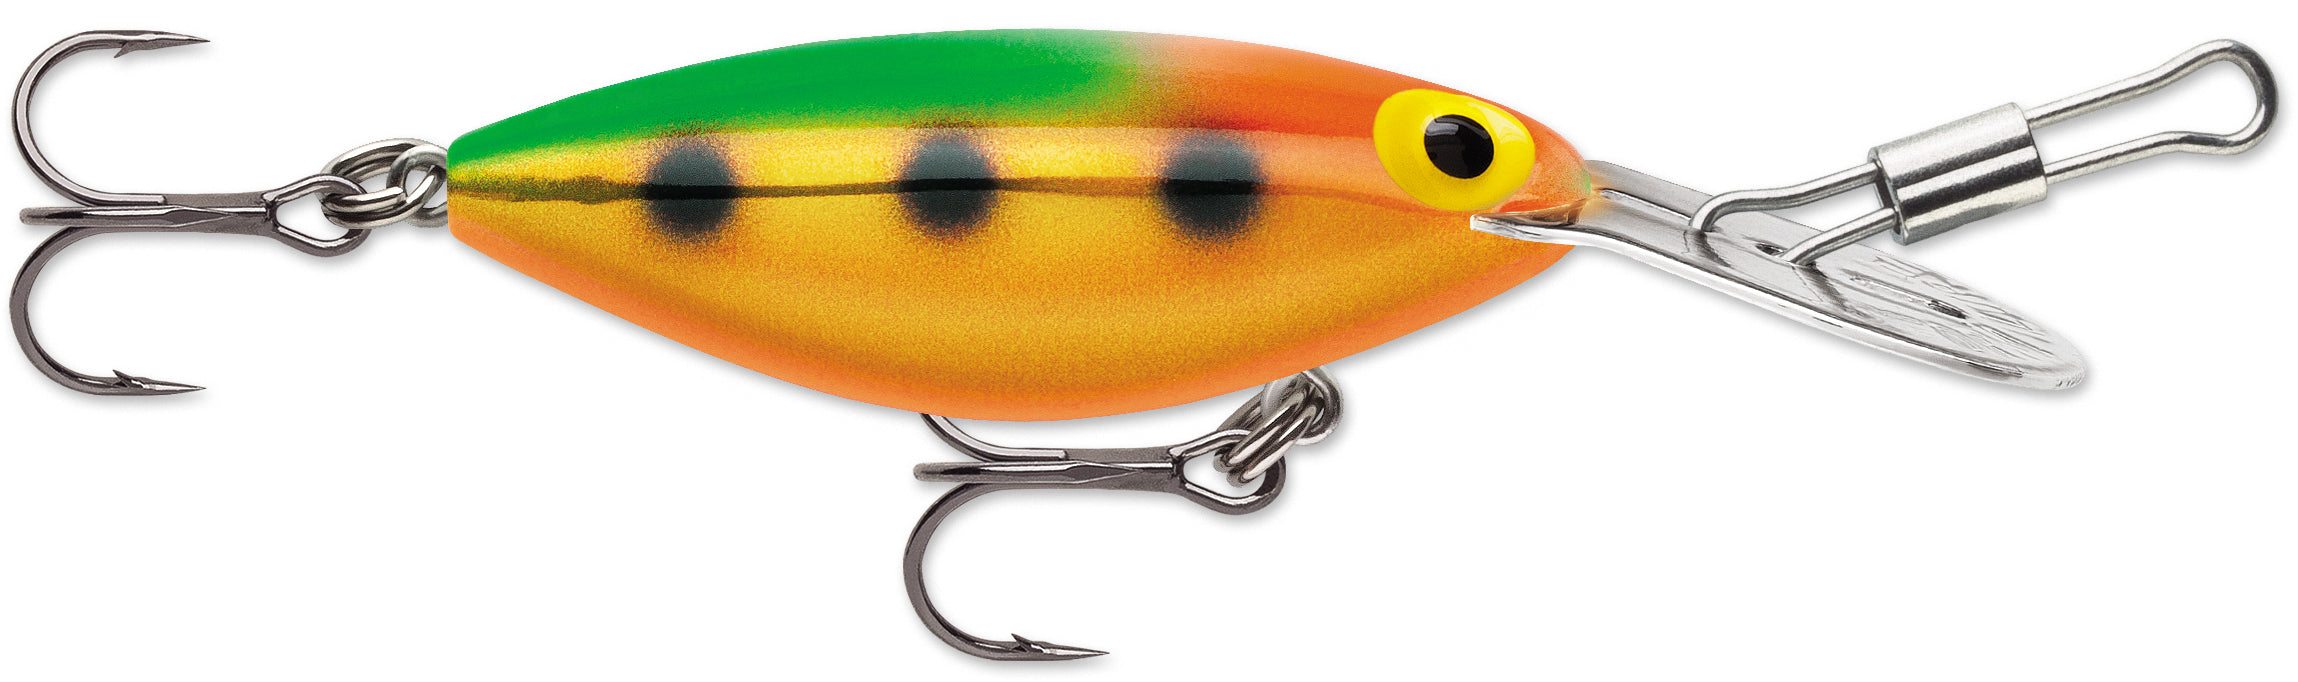 Storm Plastic Fishing Baits & Lures for sale